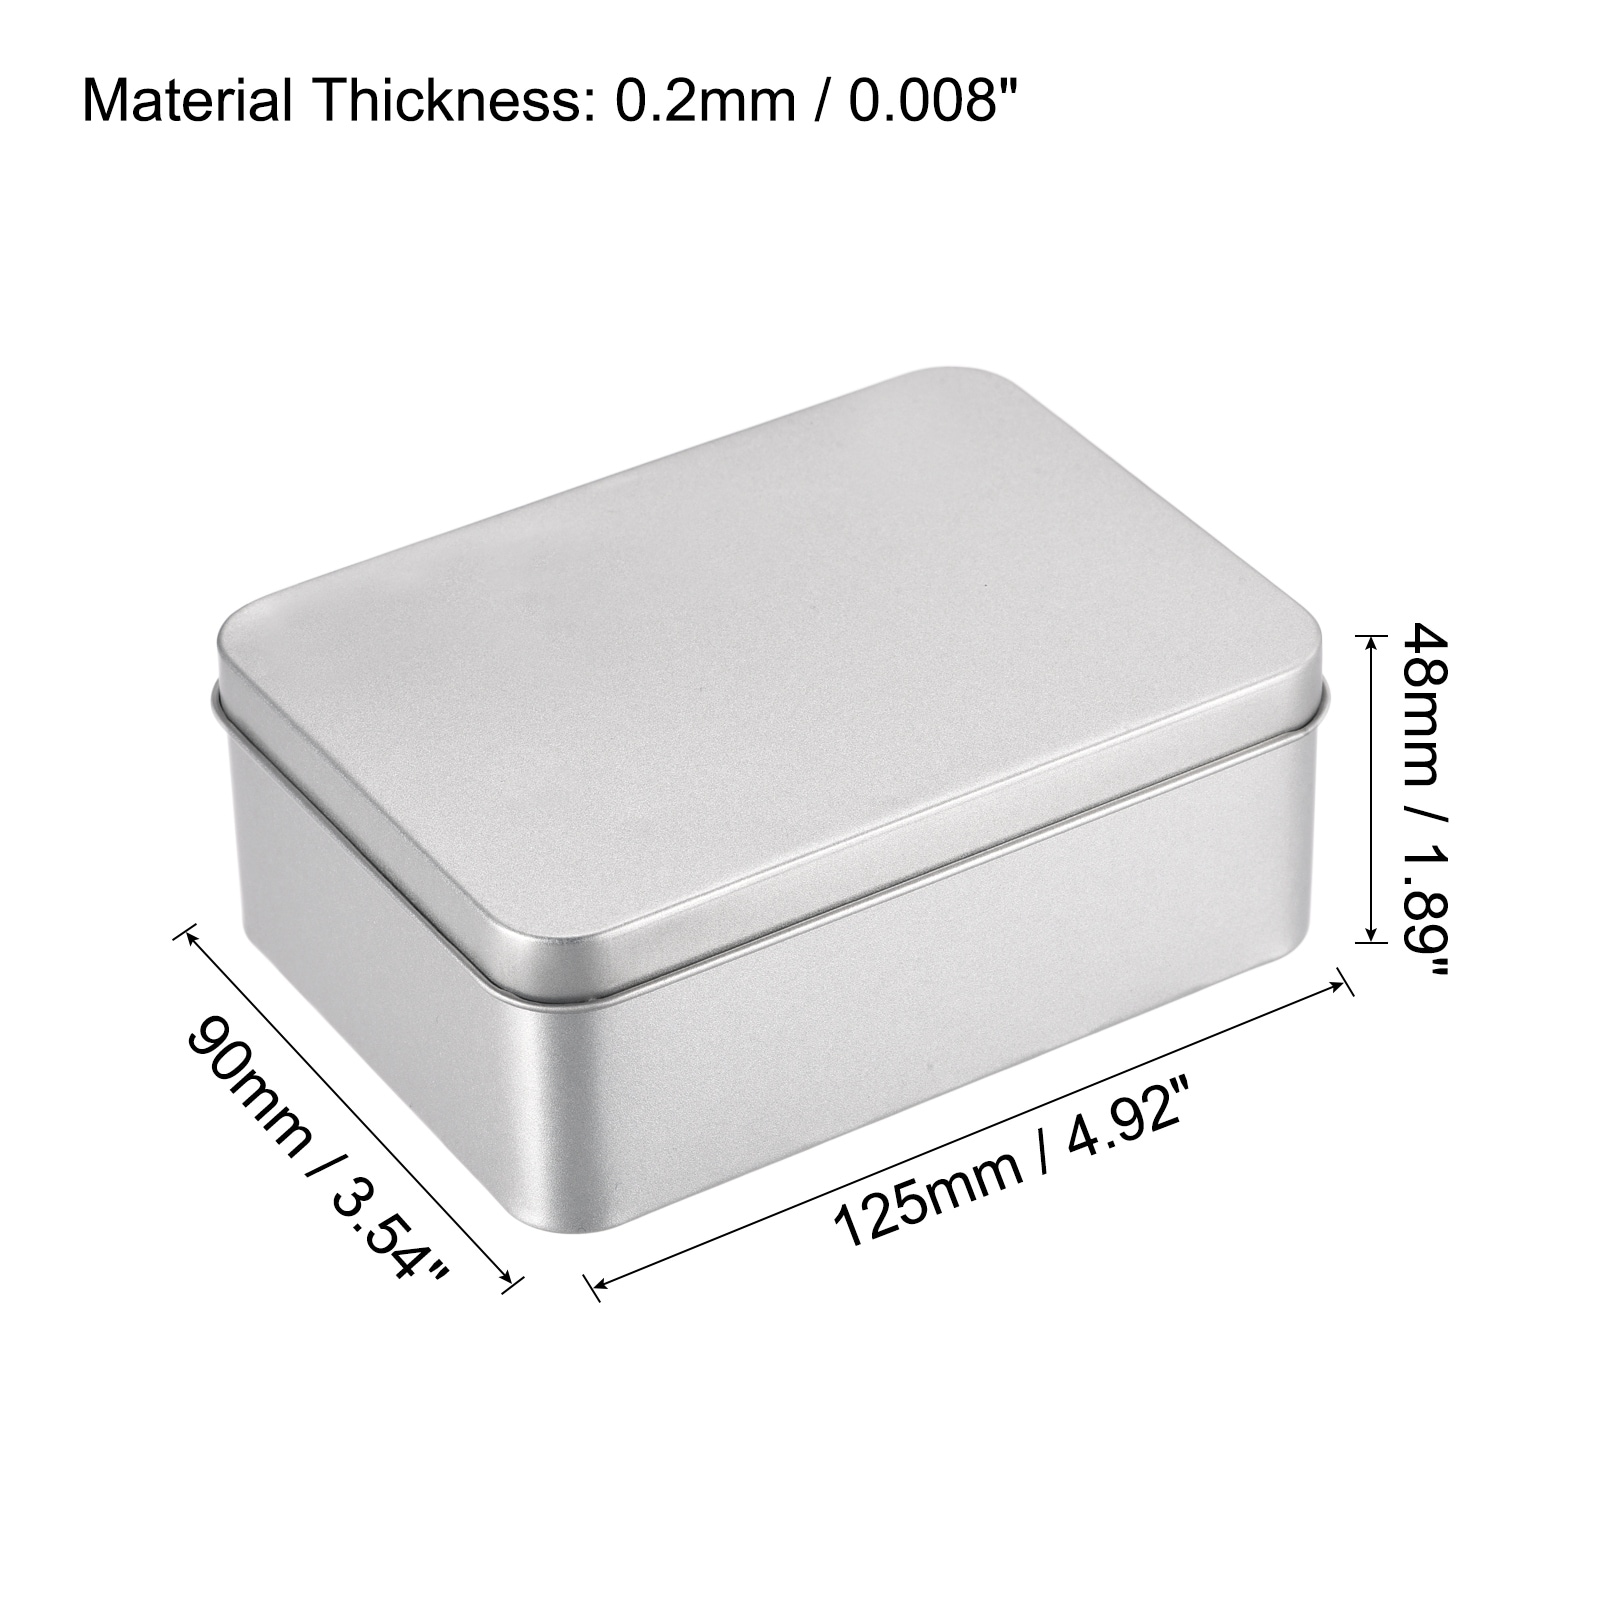 Metal Tin Box, 4.53 x 3.35 x 0.87 Containers with Clear Lids, Silver Tone